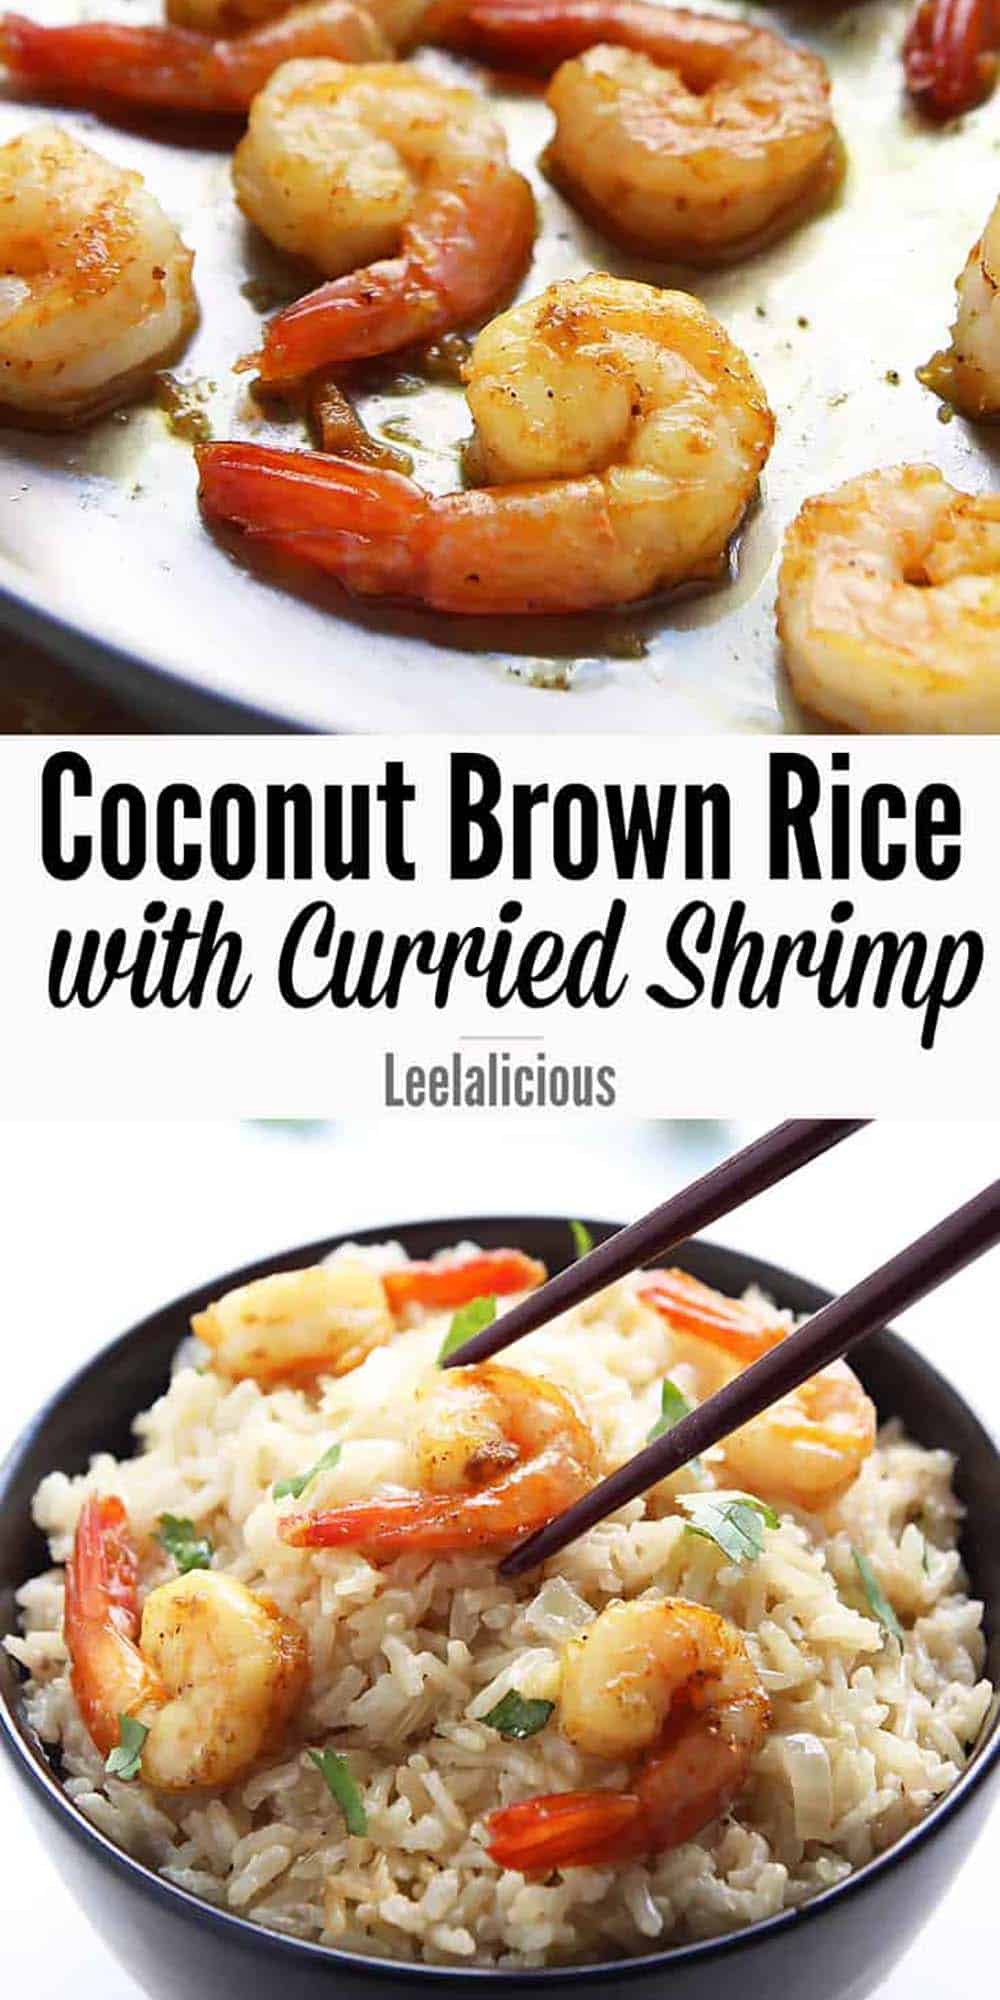 Coconut Brown Rice with Curried Shrimp